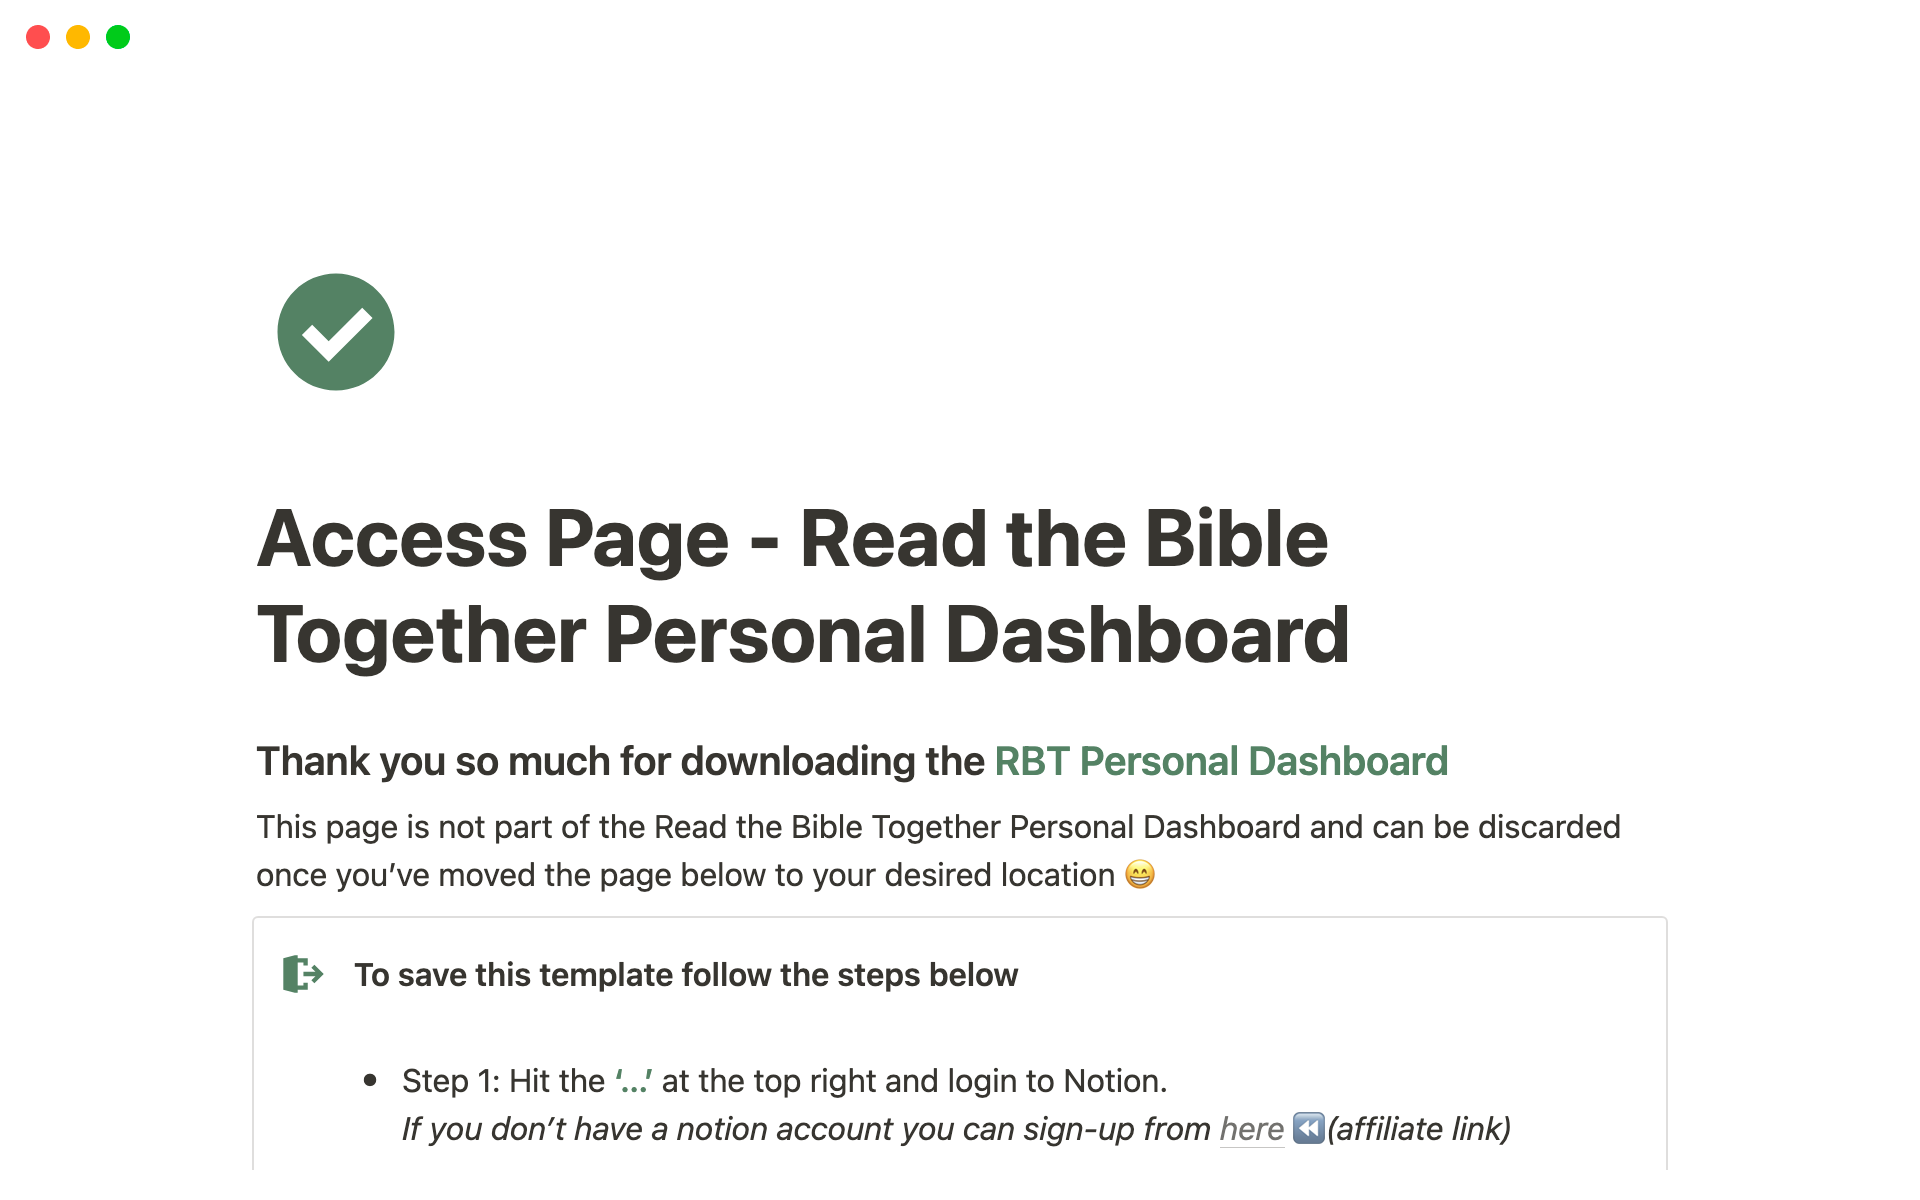 The RBT personal dashboard helps you track your Bible reading progress and enables you to take organized notes related to your learnings.